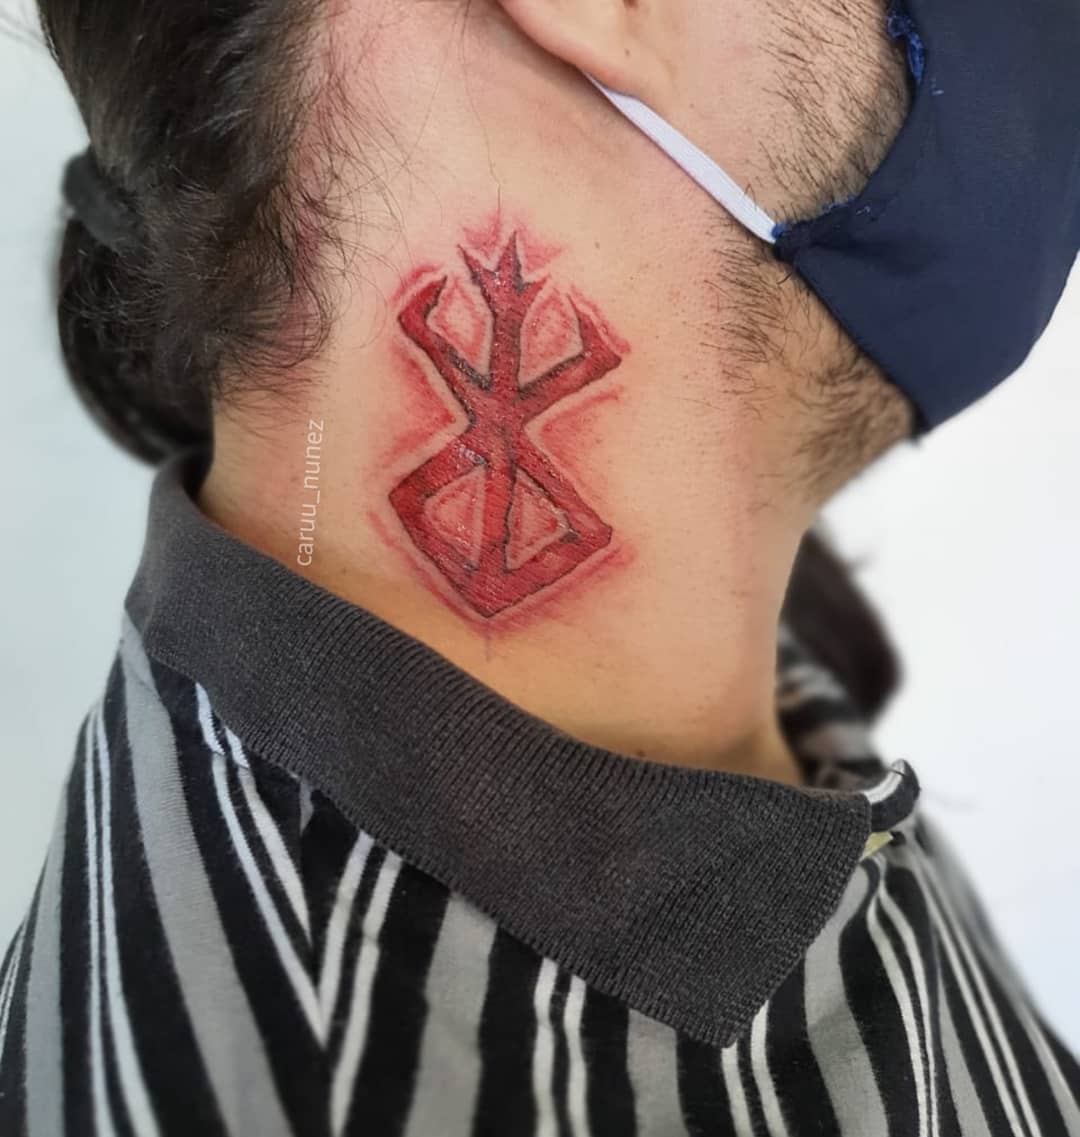 I know these have been posted a LOT over these past years but I finally  after years decided to get the Brand of Sacrifice as a tattoo not only  because I love